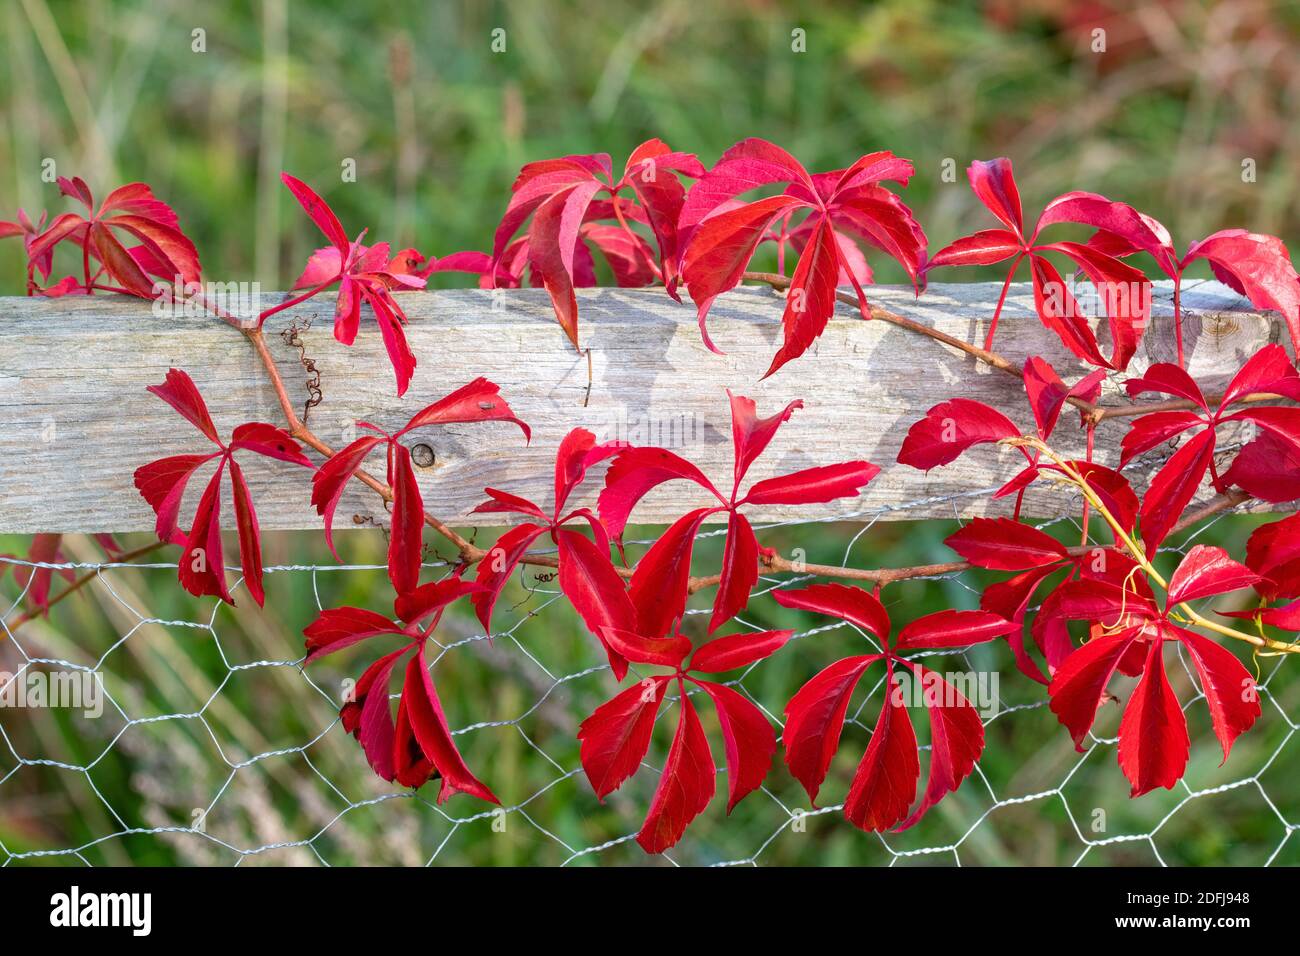 Self-climbing woodbine, Parthenocissus quinquefolia with colorful autumn leaves climbs on a fence with wire netting. Stock Photo